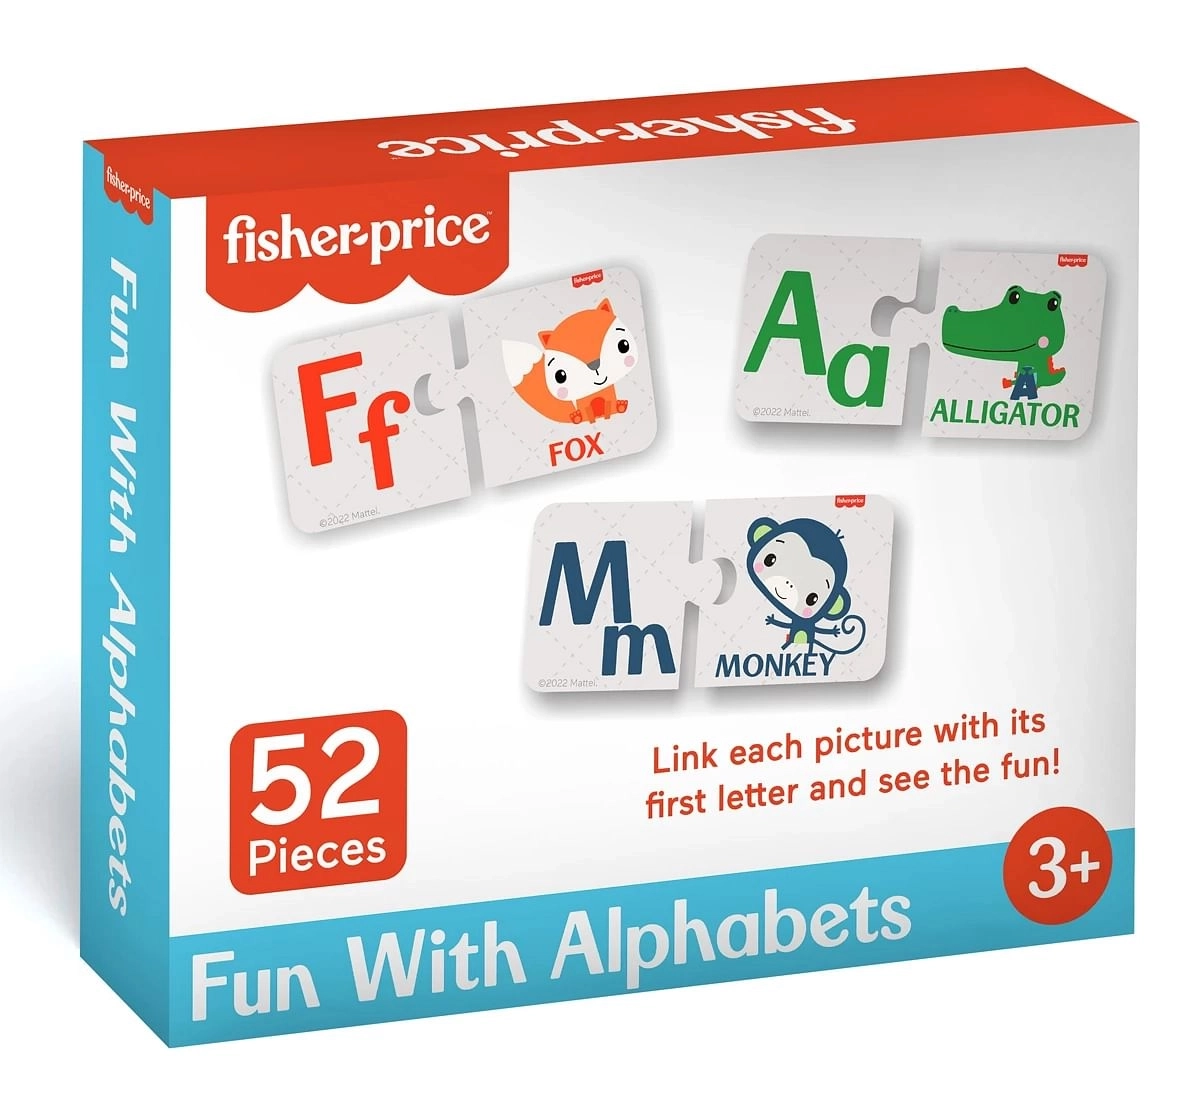 Fun with Alphabets Educational Puzzle by Fisher Price for Kids Age 3 Years +, 52 Pieces, Multicolour